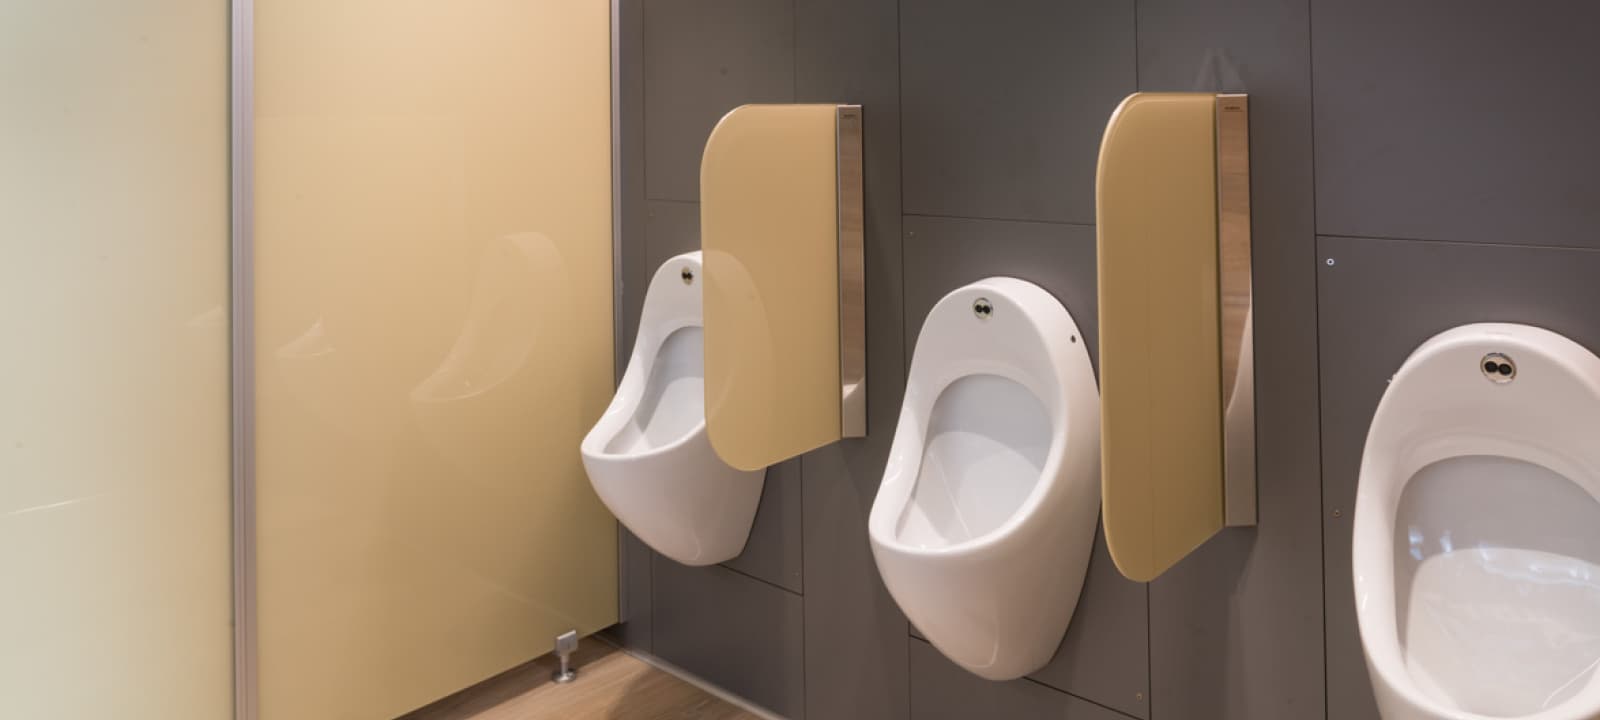 Electronic urinals and flushing cisterns